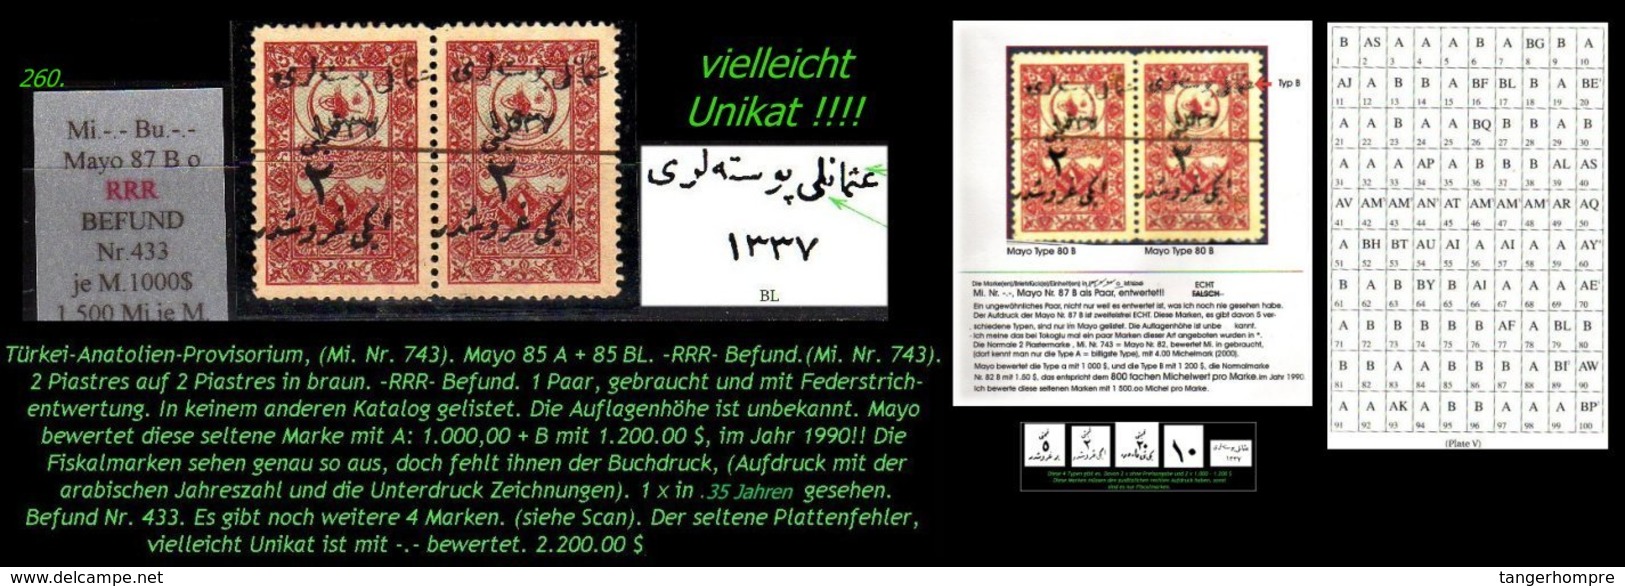 EARLY OTTOMAN SPECIALIZED FOR SPECIALIST, SEE...(Mi. Nr. 743) - Mayo 87 B + BL -RRRR- UNICAT ??? - 1920-21 Anatolia